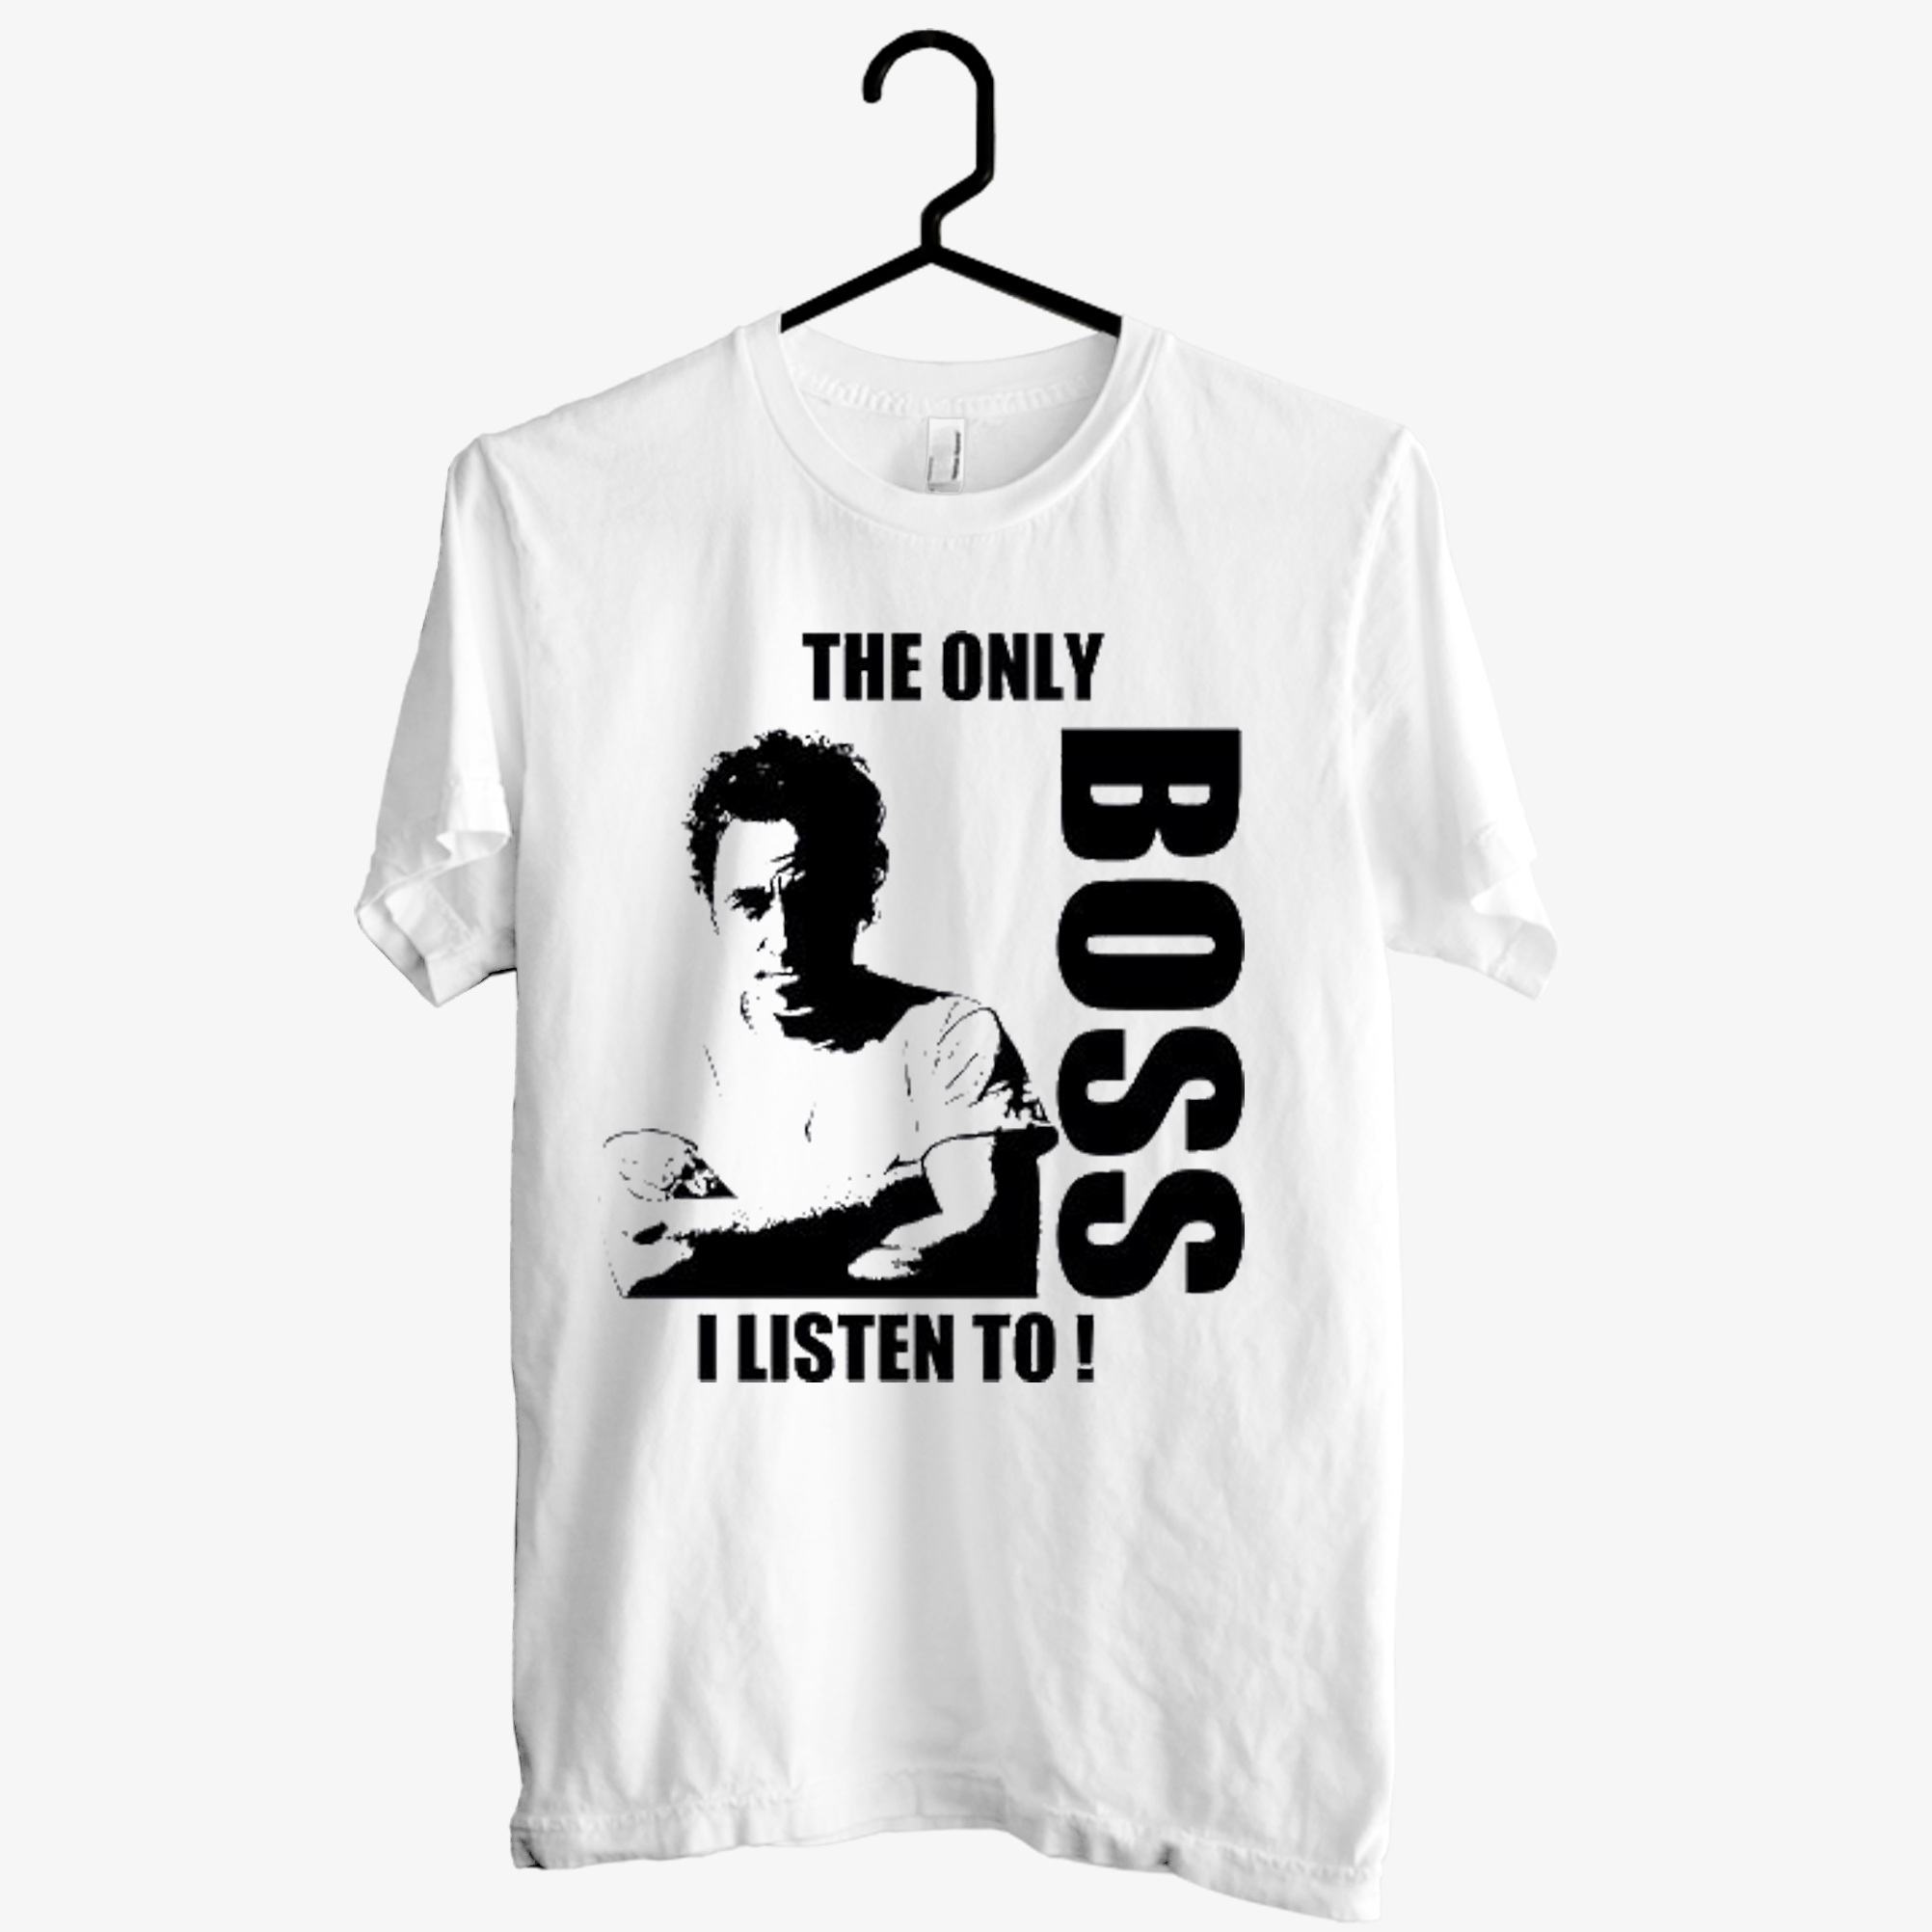 The Only Boss I Listen To T shirt